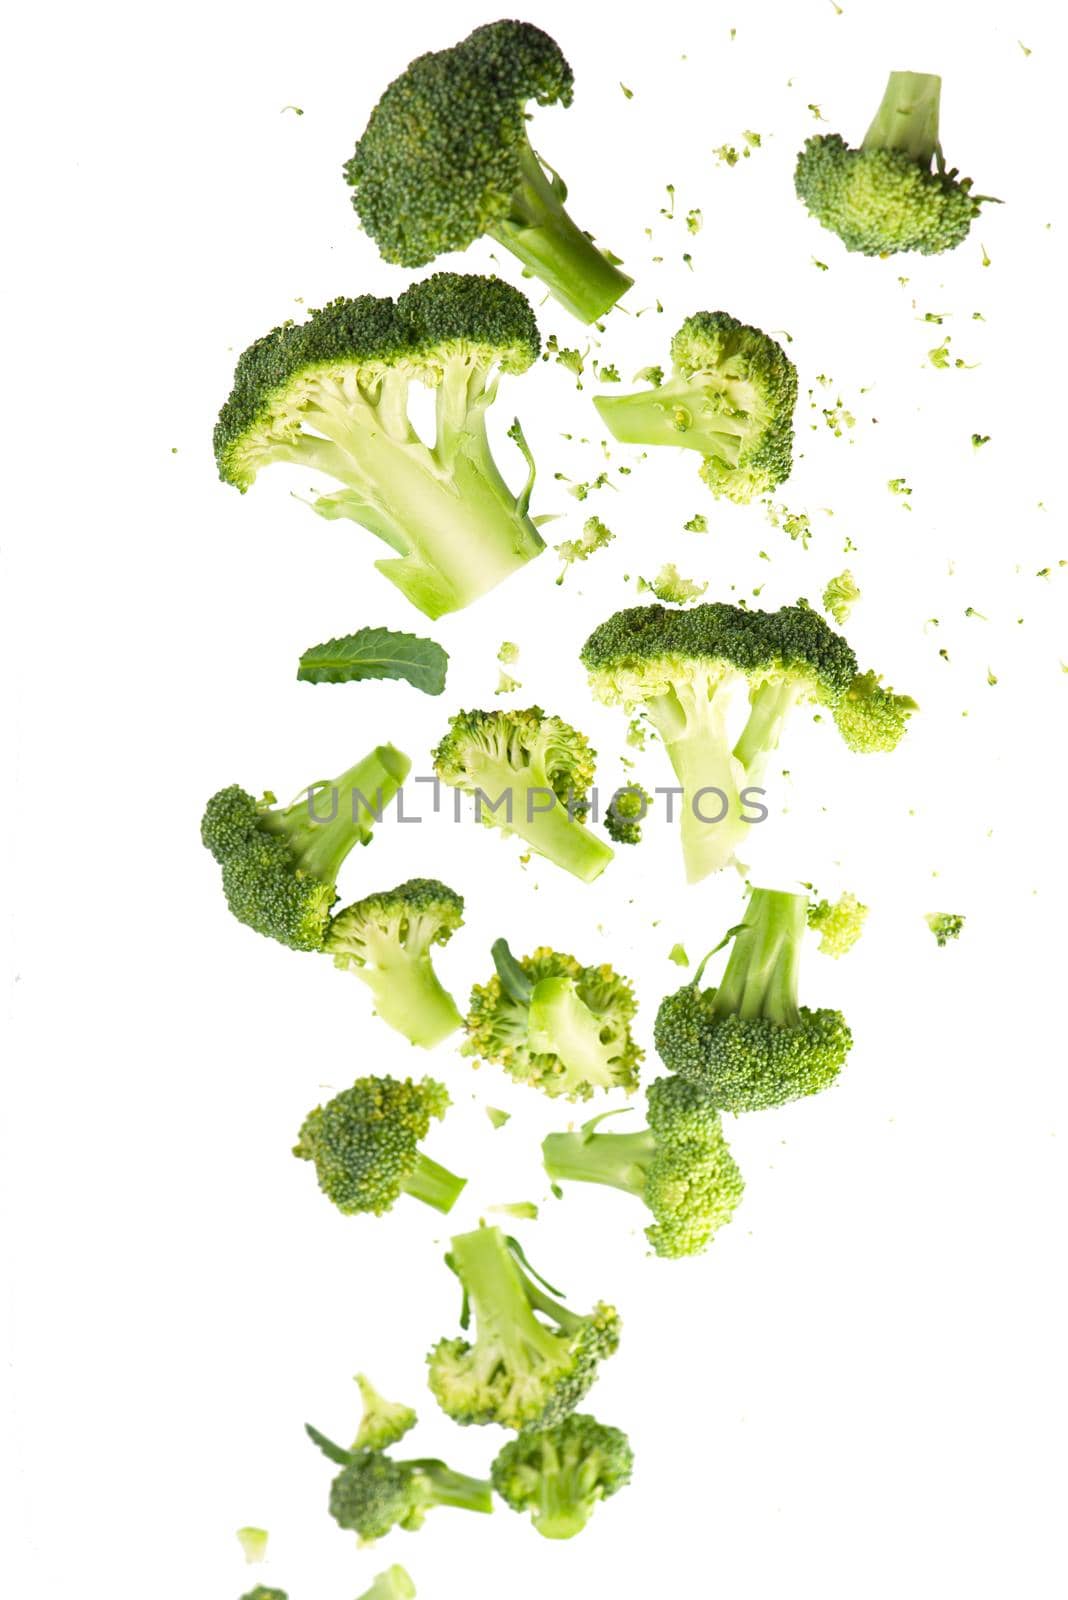 Broccoli pattern isolated on a white background. Various multiple parts of broccoli flower. Top view.